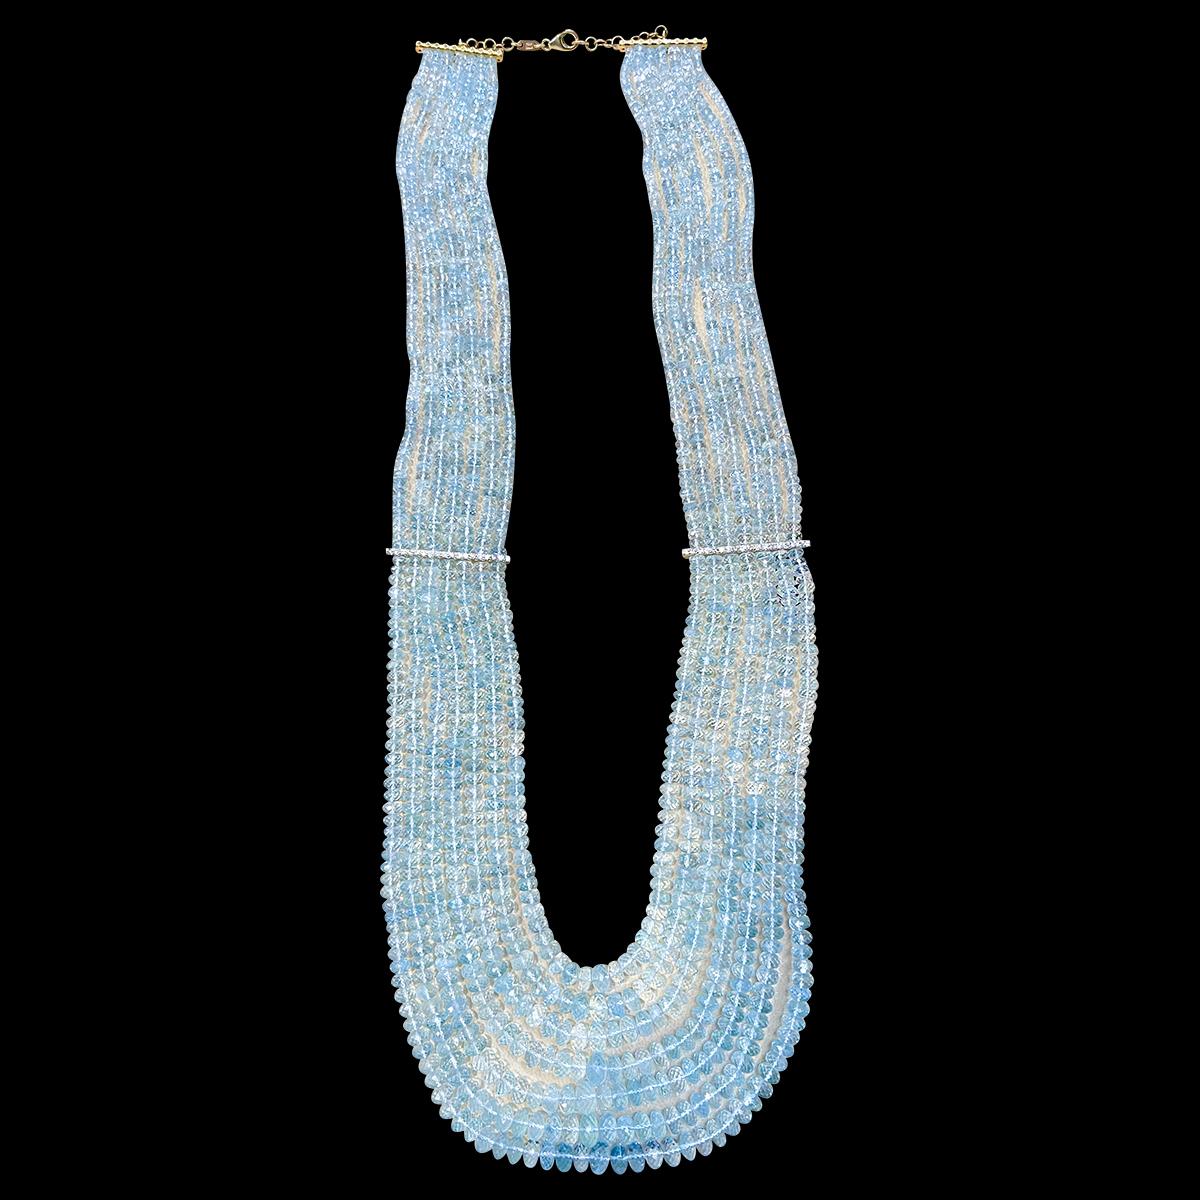 1100 Ct 6 Layer Natural Aquamarine Bead Necklace 14 Kt Gold and Diamond Necklace In Excellent Condition For Sale In New York, NY